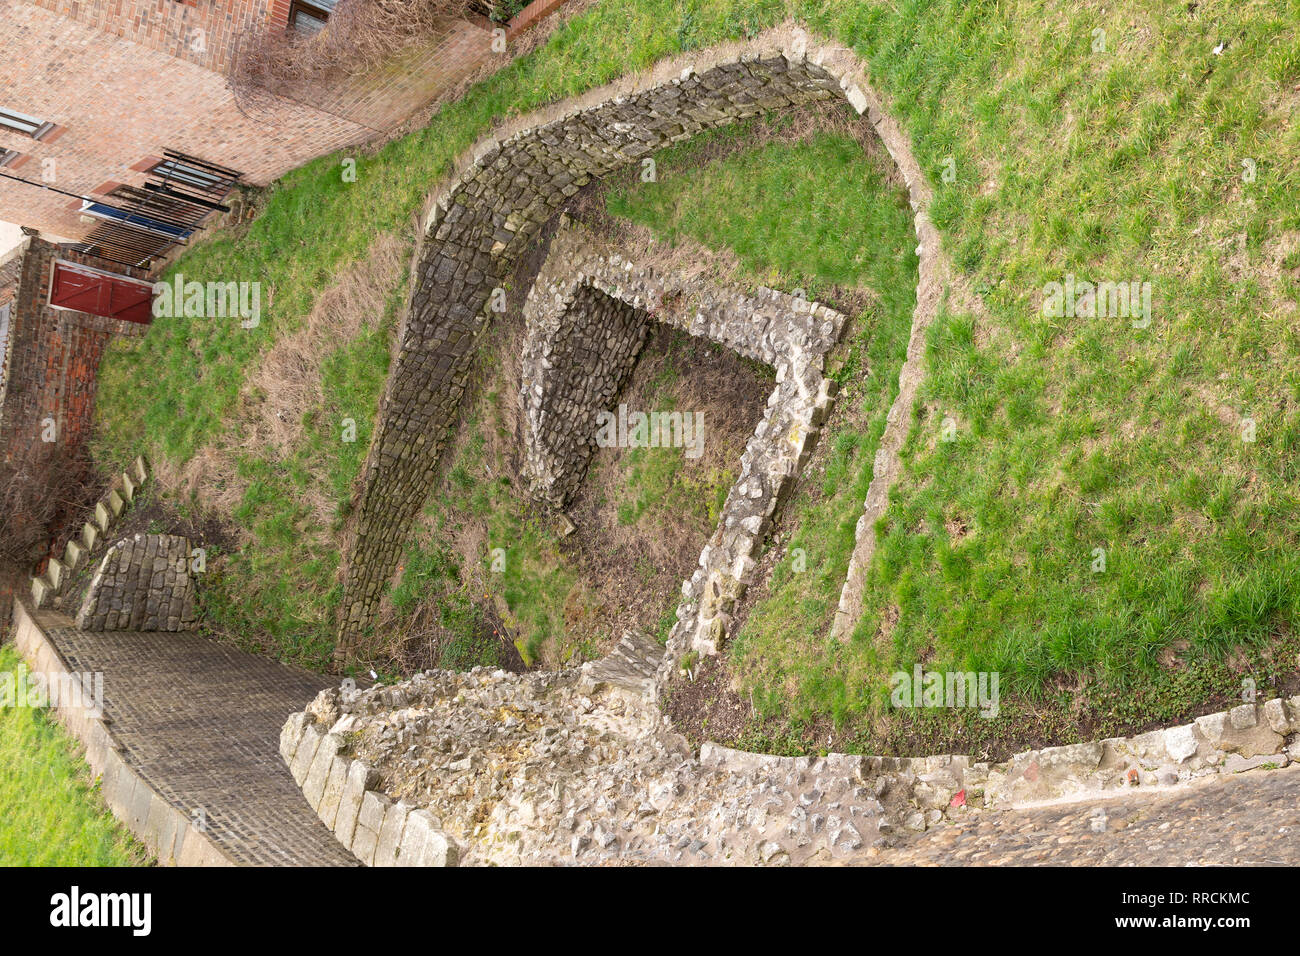 Excavated Roman remains in York, England. The walls are part of the Roman fort of Eboracum. Stock Photo